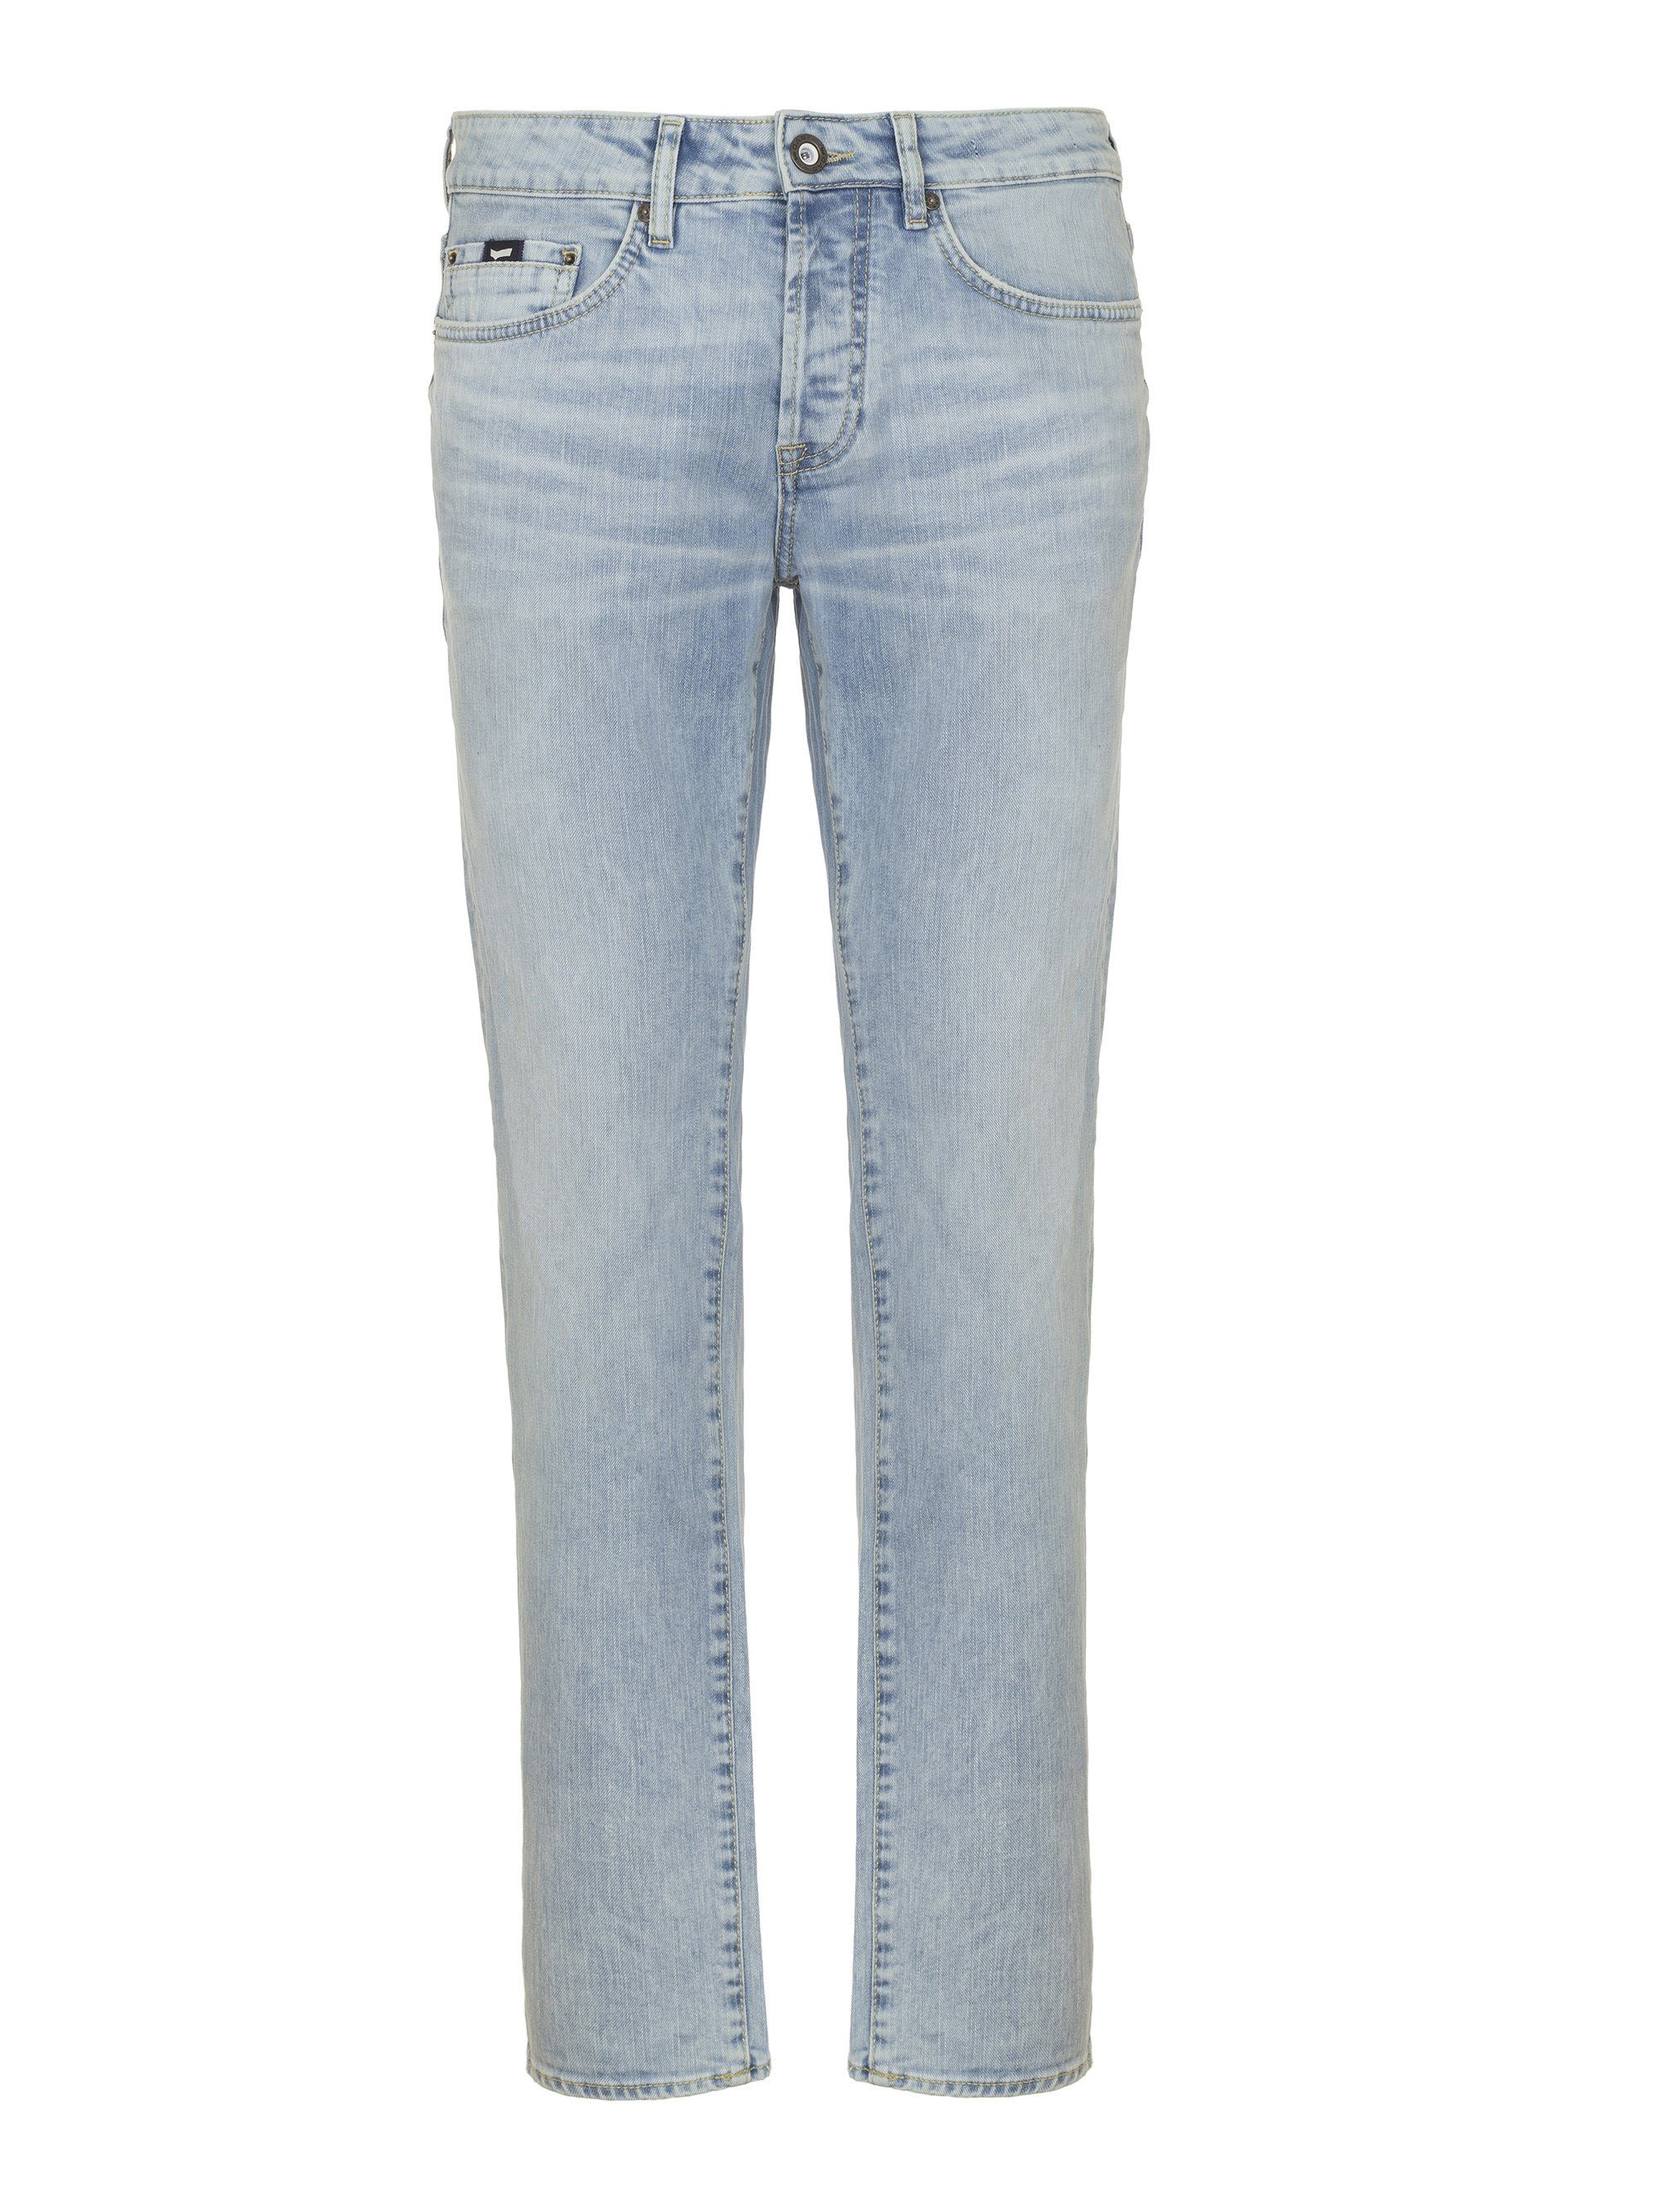 GAS Slim-fit-Jeans wash super Super-Bleached-Waschung mit ANDERS bleach